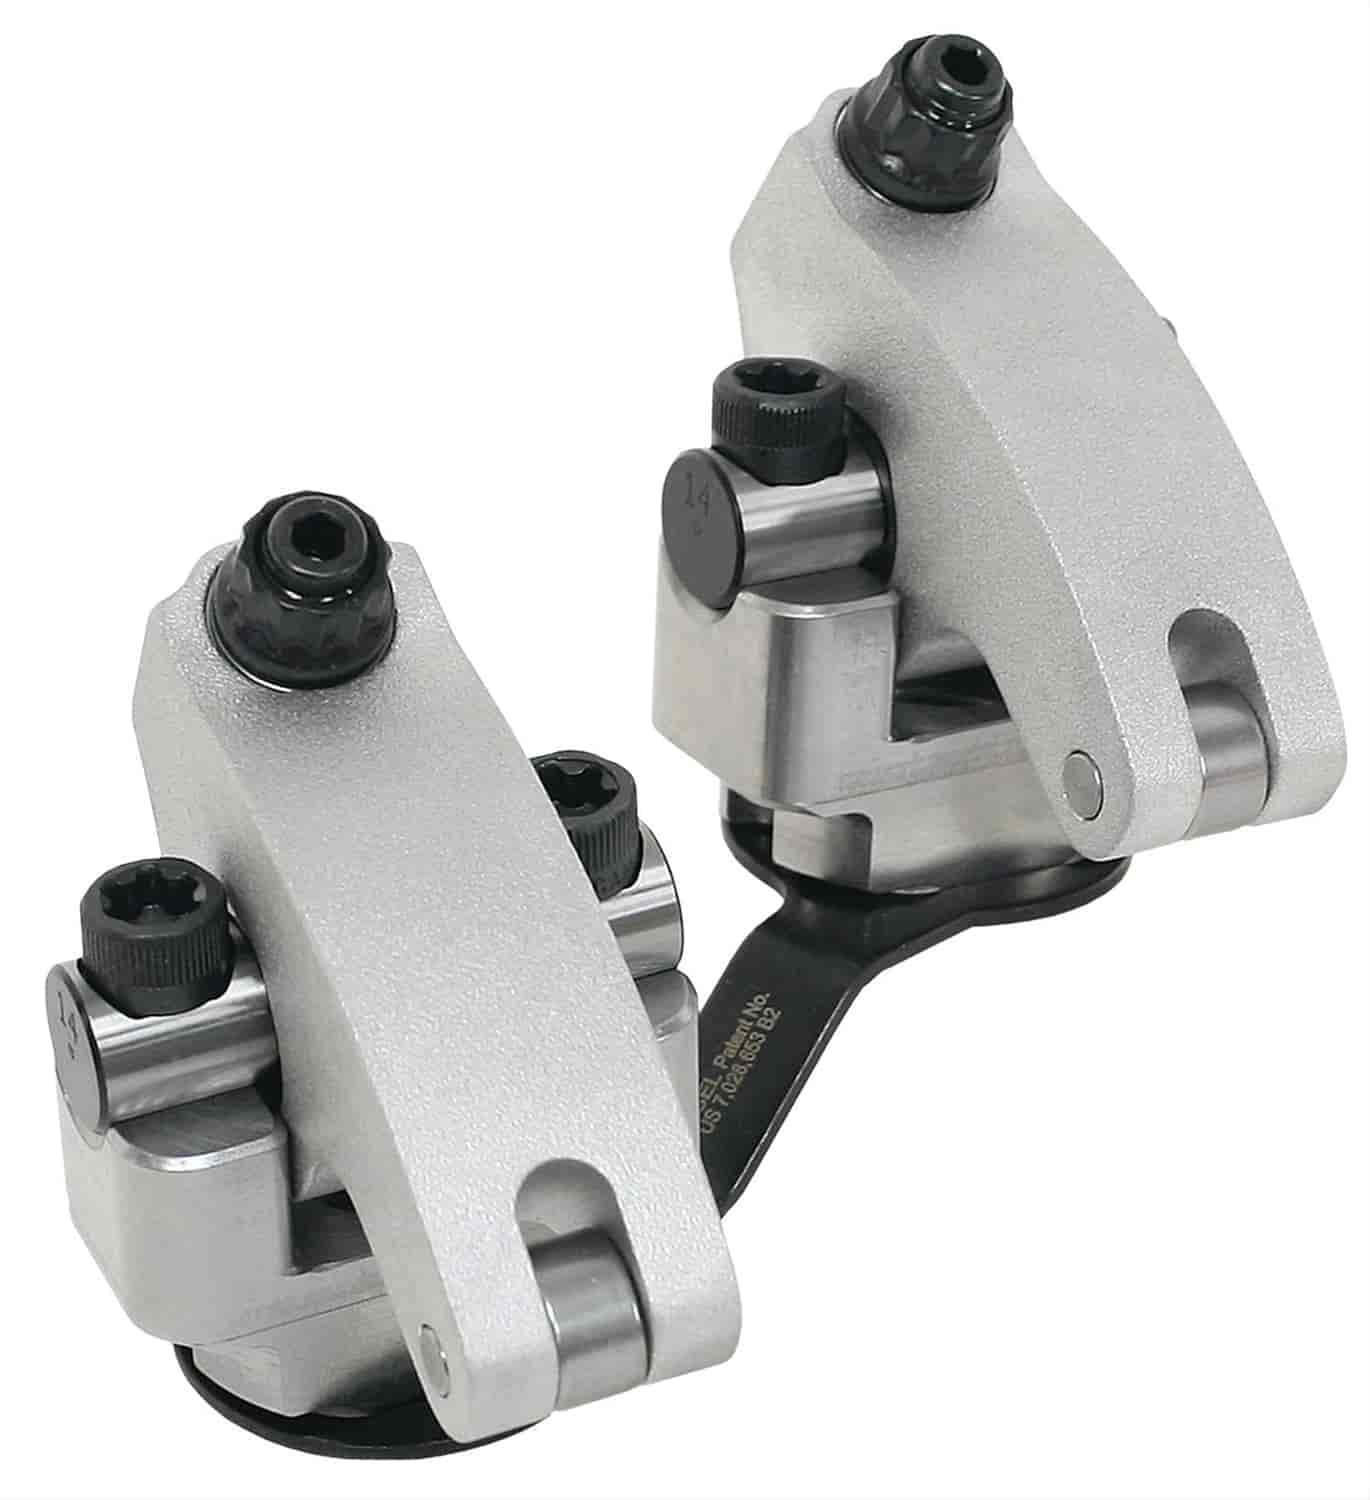 Series SS Shaft Mount Rockers Fits: World Products Merlin Oval/Cast Iron Rocker Ratio: 1.75 IN / 1.7 EX